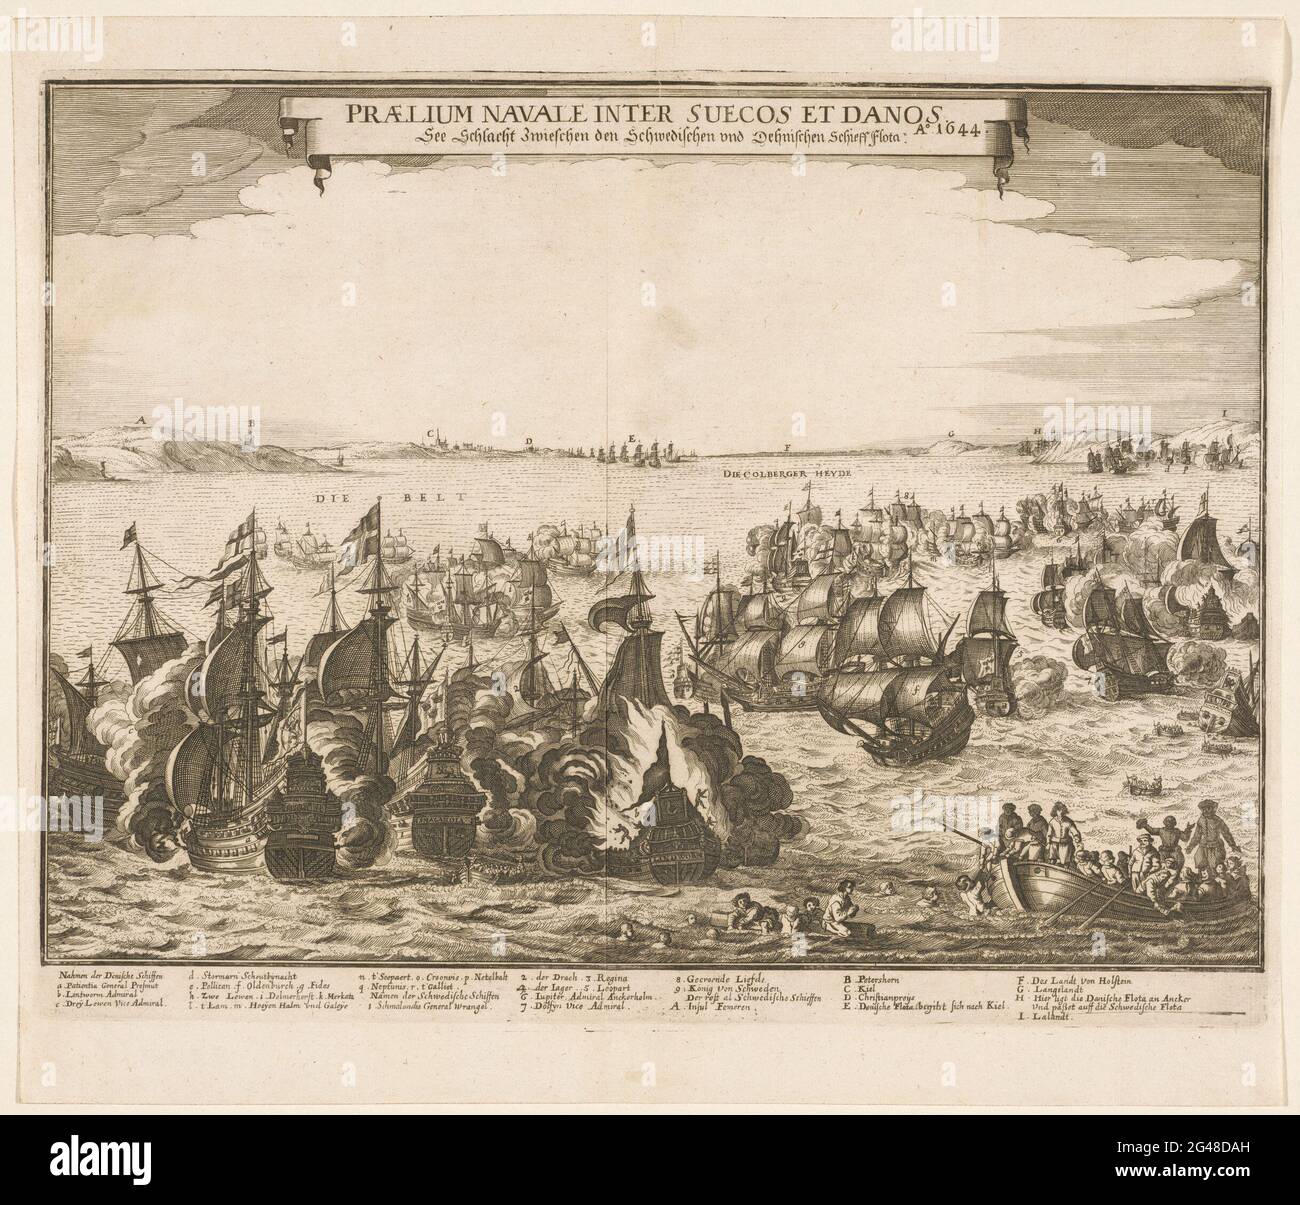 Sea battle between the Swedish and Danish fleets in the Belt, 1644; Praelium Naval Inter SueCos et Danos / Ao. 1644 / See Schlacht Zwieschen den Schwedischen und Dehnischen Schieffflota. Sea battle between Swedish and Danish fleets in the Fehmarn Belt (between the Danish lolland and the German island of Fehmarn), October 23, 1644. The Swedes are assisted by a Dutch fleet below Maerten Thijssen Anckerhelm. Sea battle in full swing, centrally burning Danish ship de lindeworm, in the foreground drenches in a sloop. In the caption, the legendas A-R and 1-9 and A-i in German. There is also a map wi Stock Photo